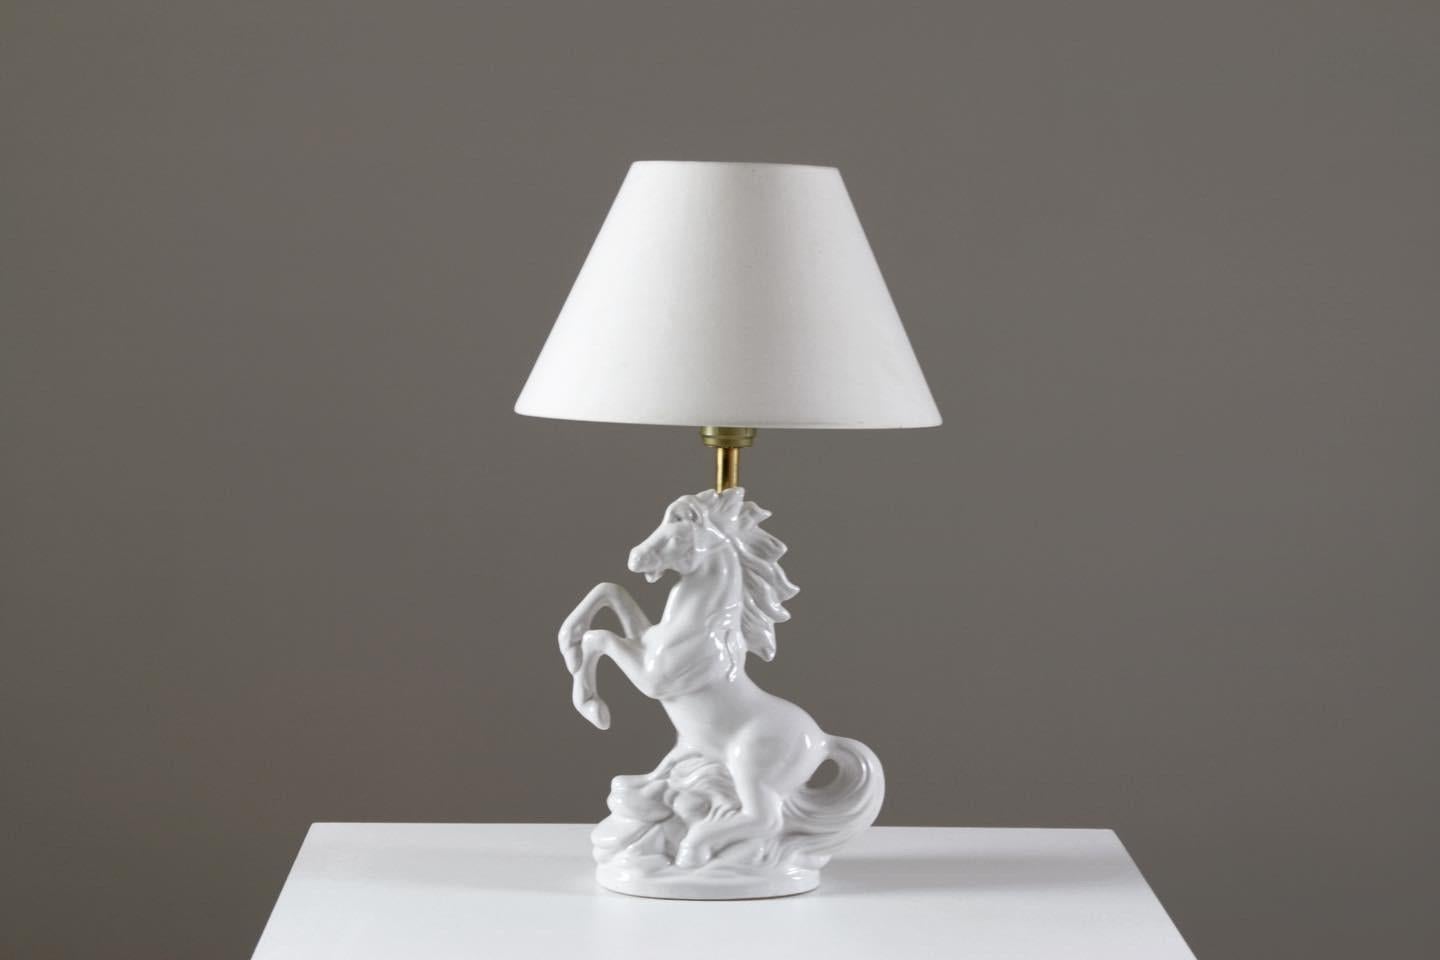 Ceramic lamp illustrating a prancing white horse. Very decorative and in very good condition. Dimensions: D 42 X W 22 X H 12 cm.